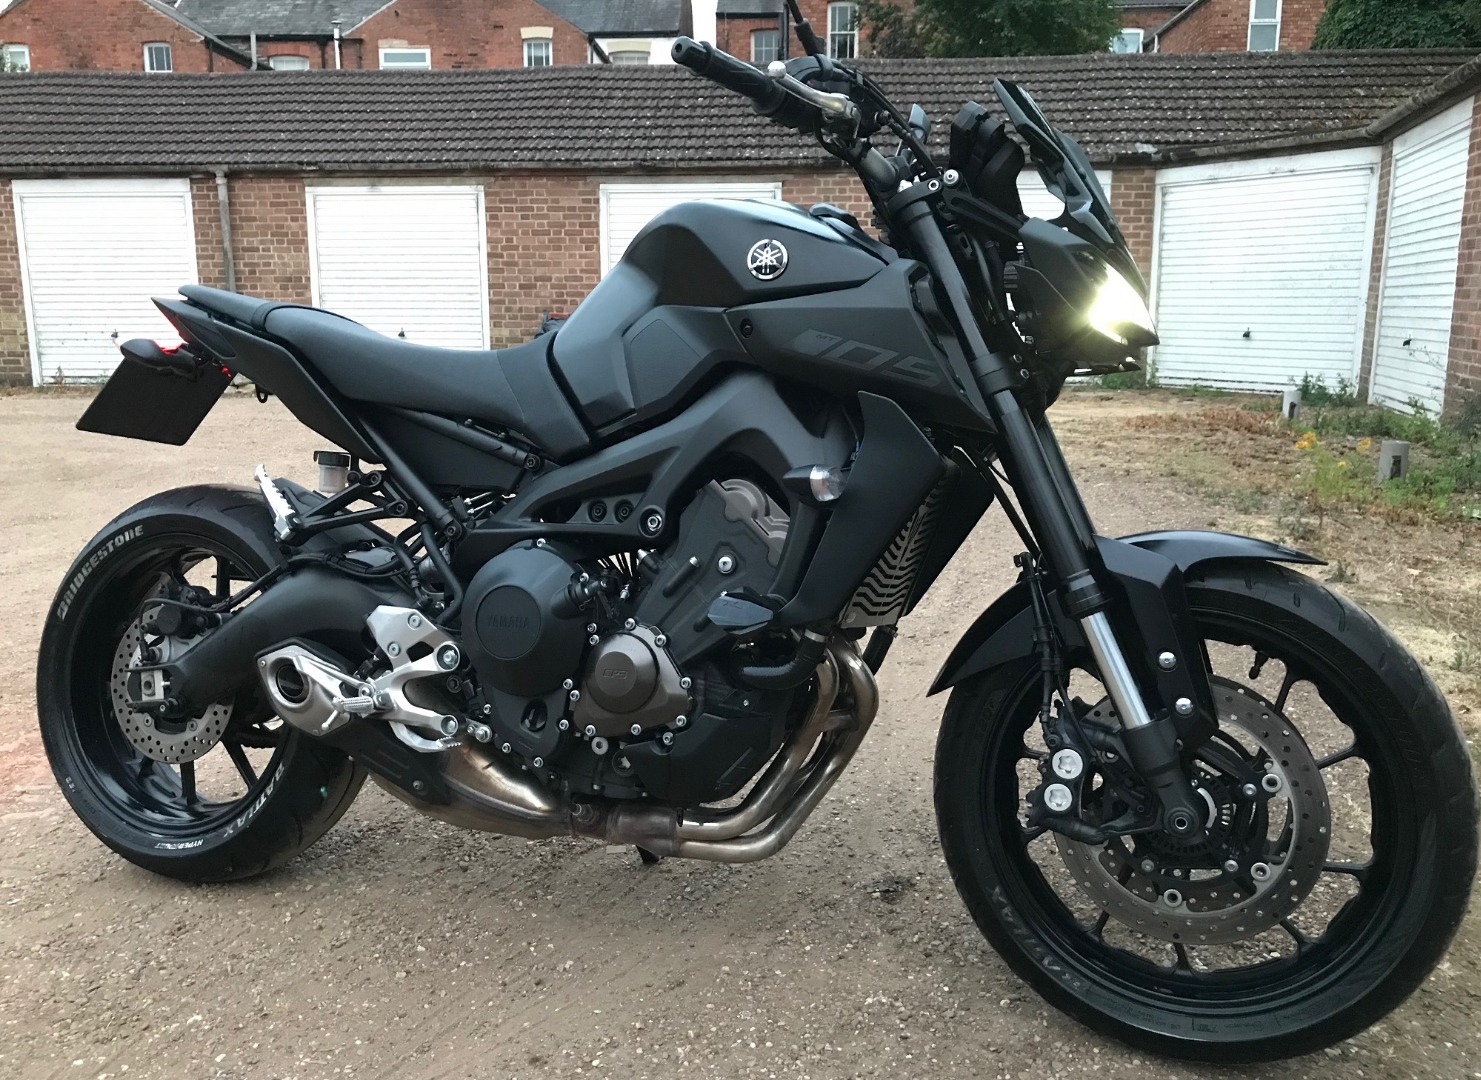 Yamaha MT-09 (2017) • For Sale • Price Guide • The Bike Market